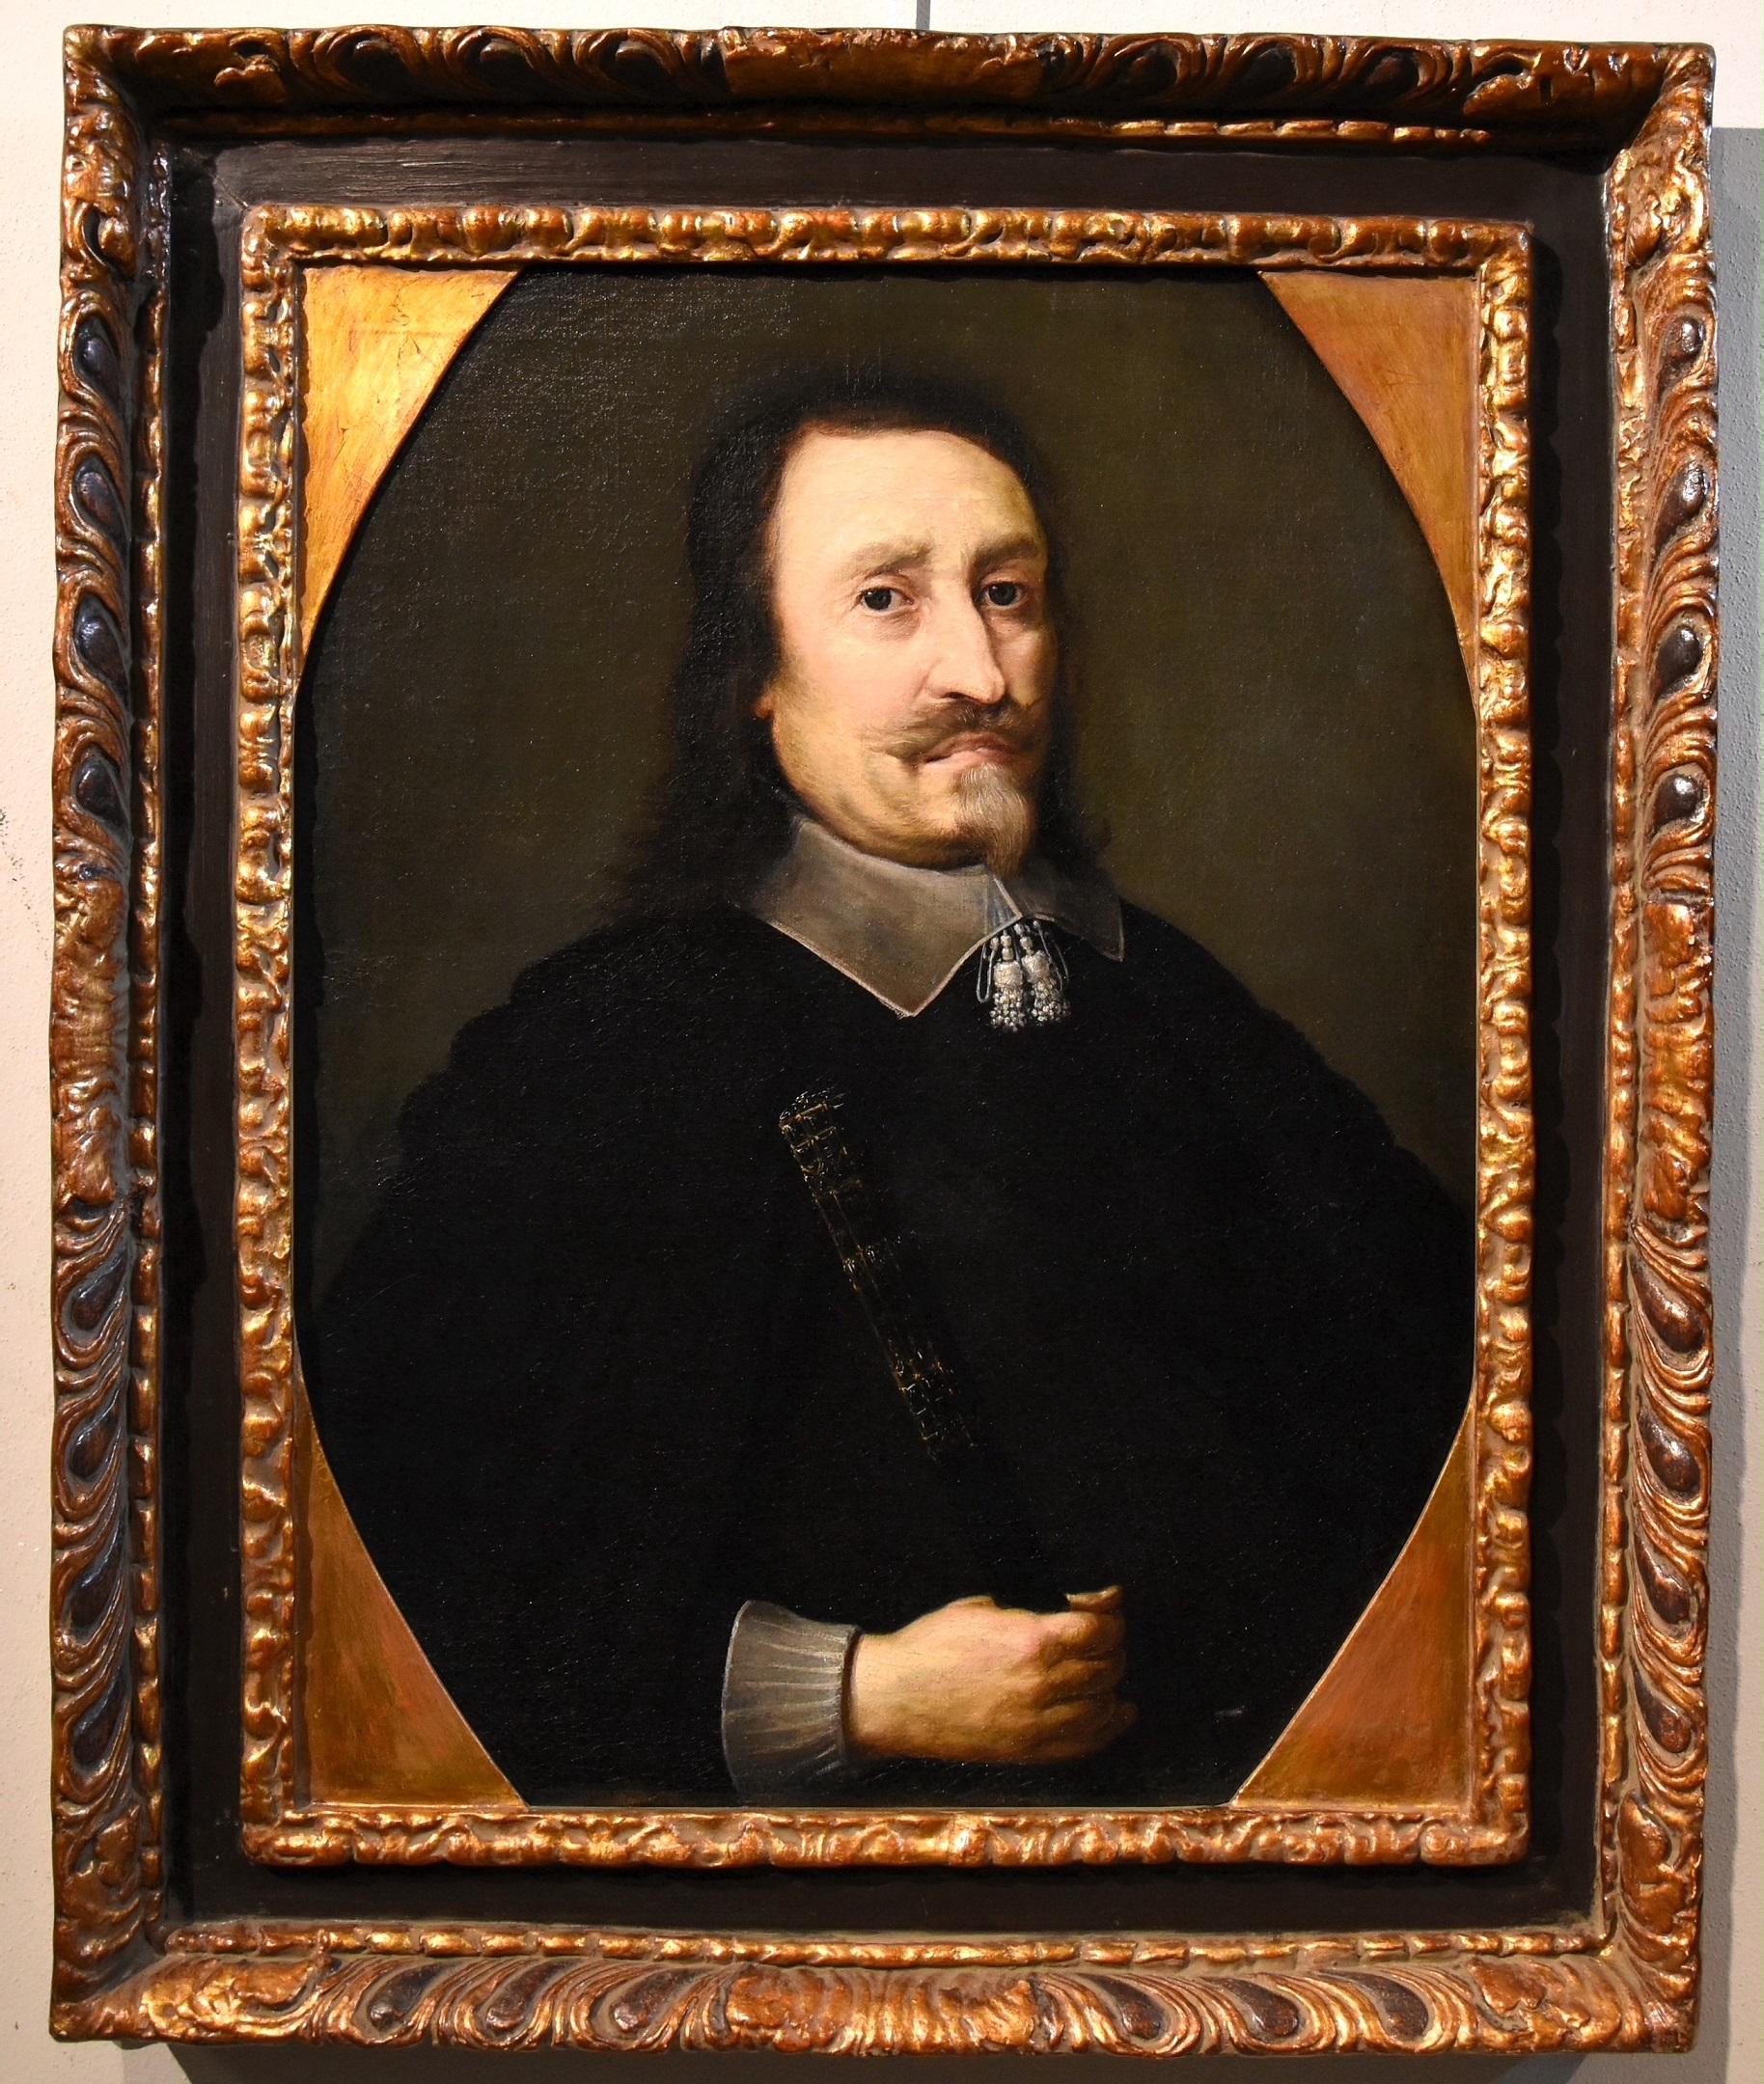 Giusto (or Justus) Sustermans (Antwerp, 1597 - Florence, 1681) Portrait Painting - Portrait Medici Sustermans Paint Oil on canvas Old master 17th Century Flemish 